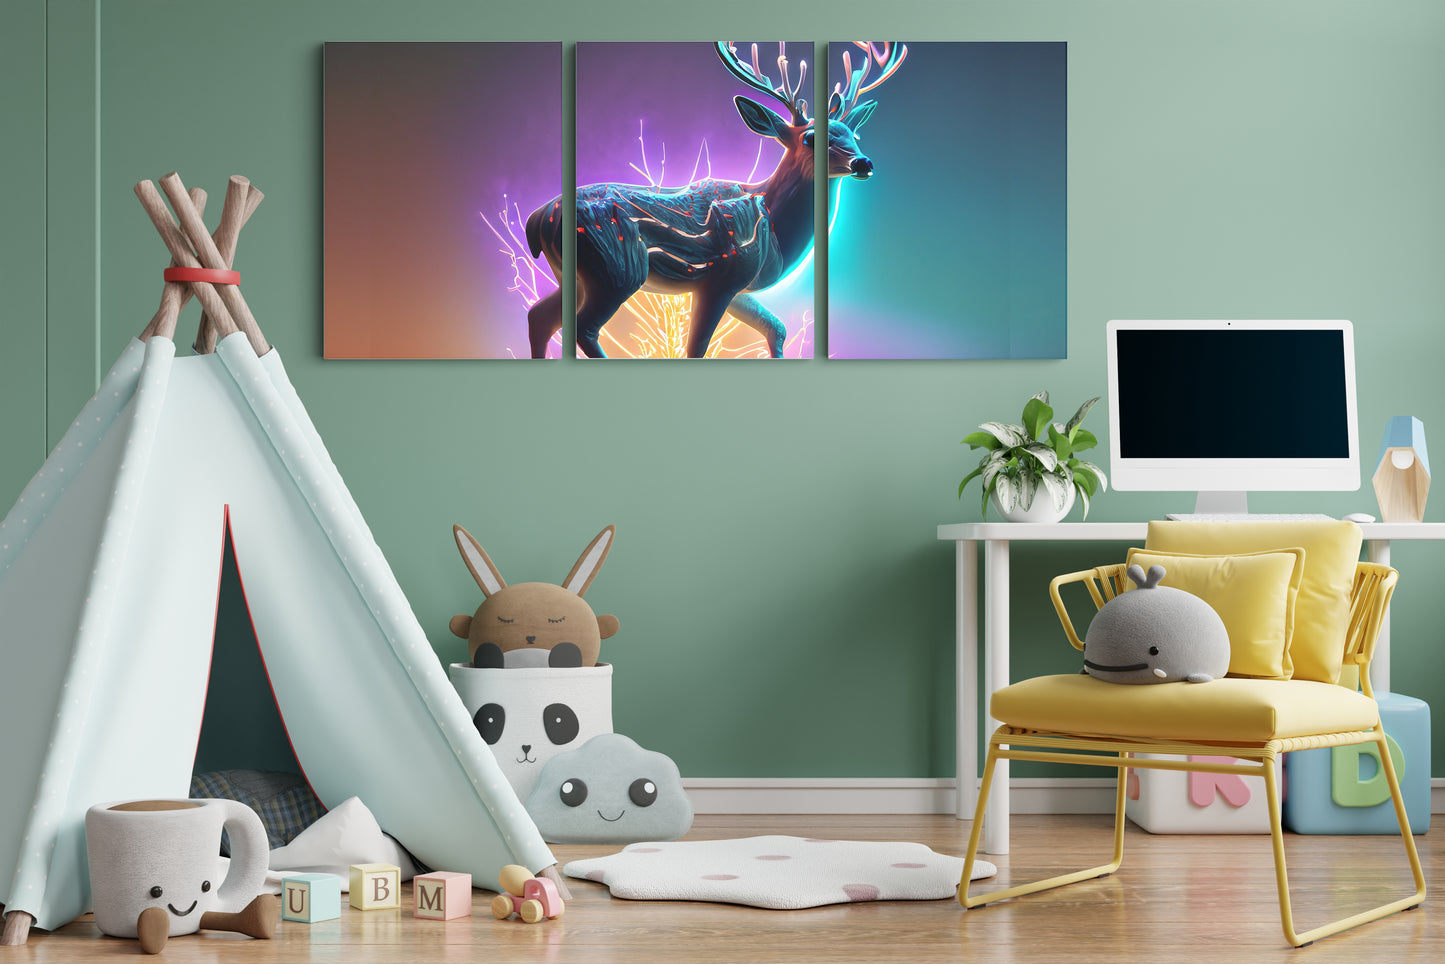 Radiant Majesty: Glowing Neon Deer - Captivating Wall Art Celebrating the Mesmerizing Glow and Regal Presence of a Luminous Deer - S06E06